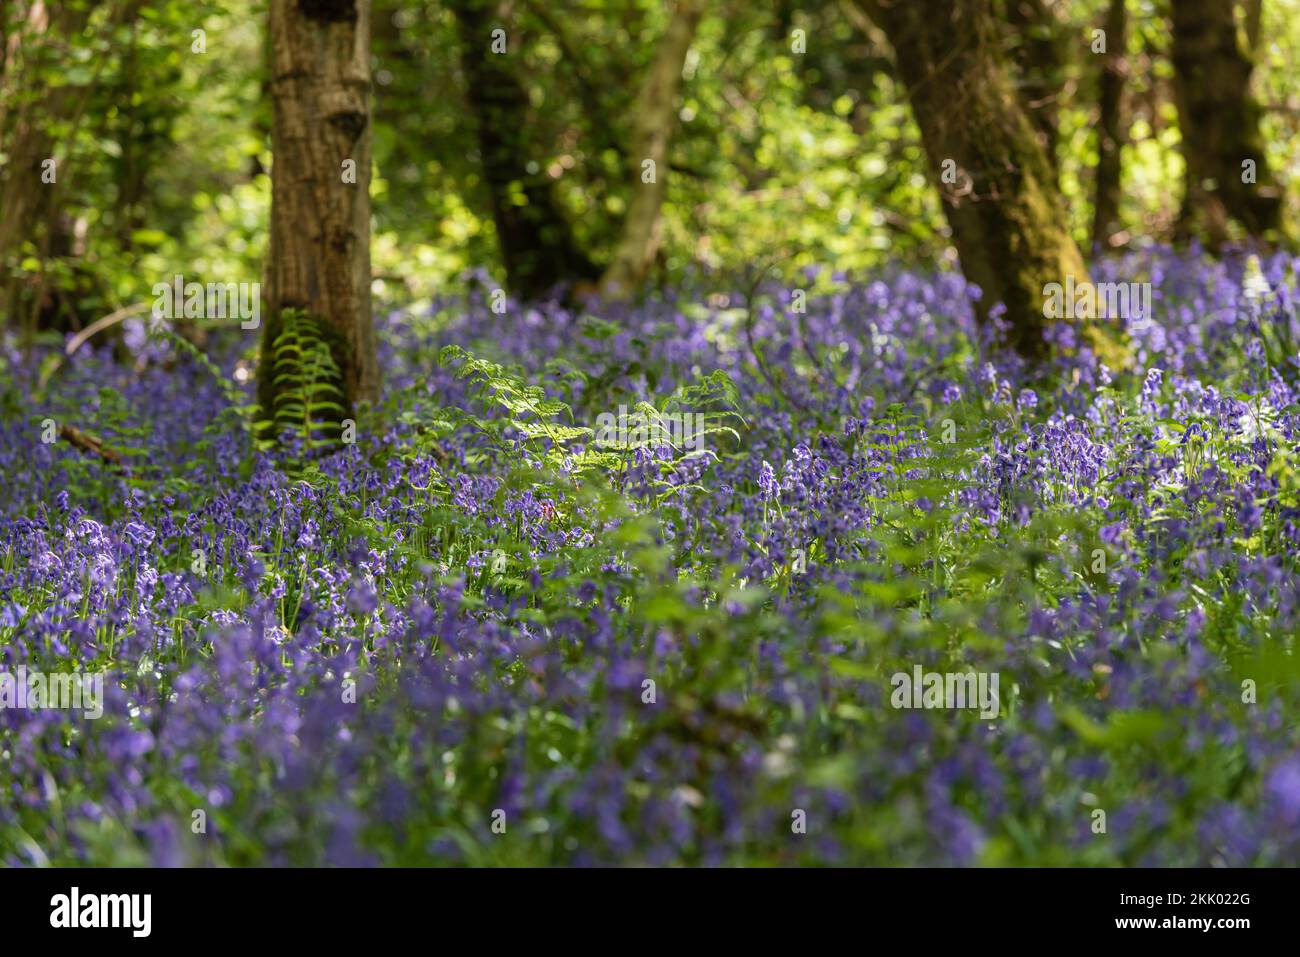 Foxley Wood in spring with bluebells, Norfolk Wildlife Trust ii. Foxley Wood NWT, May 2022 Stock Photo